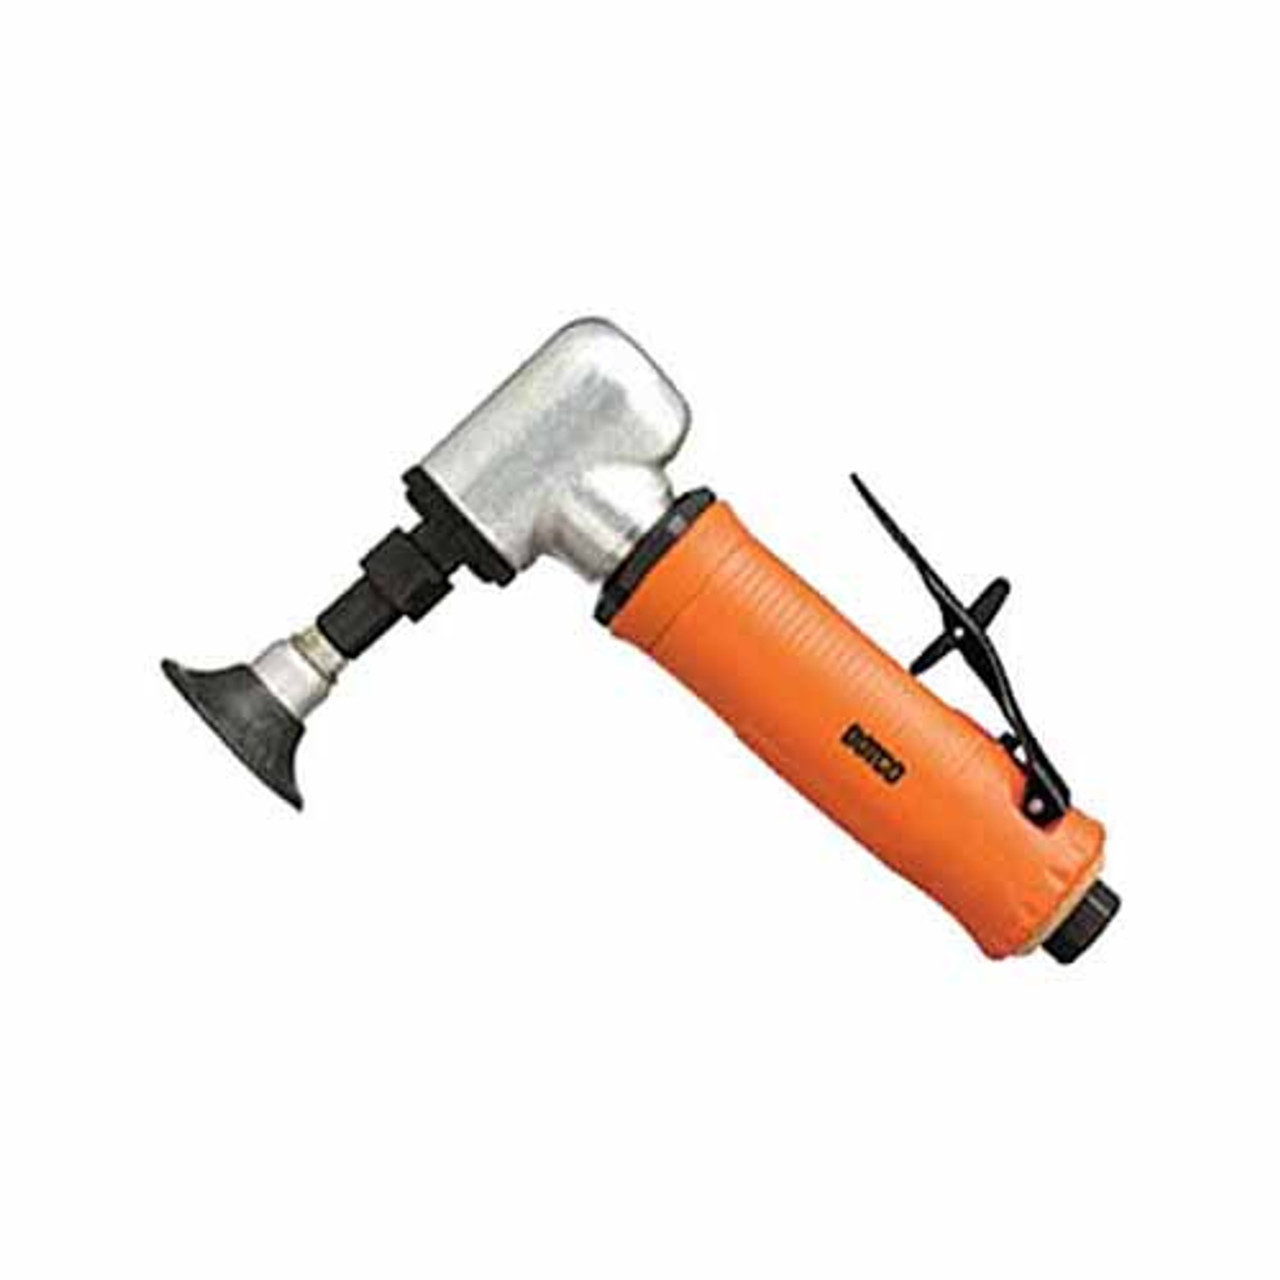 Dotco 12L1380-36 Gearless Right Angle Grinder 12-13 Series 0.3 HP  30,000